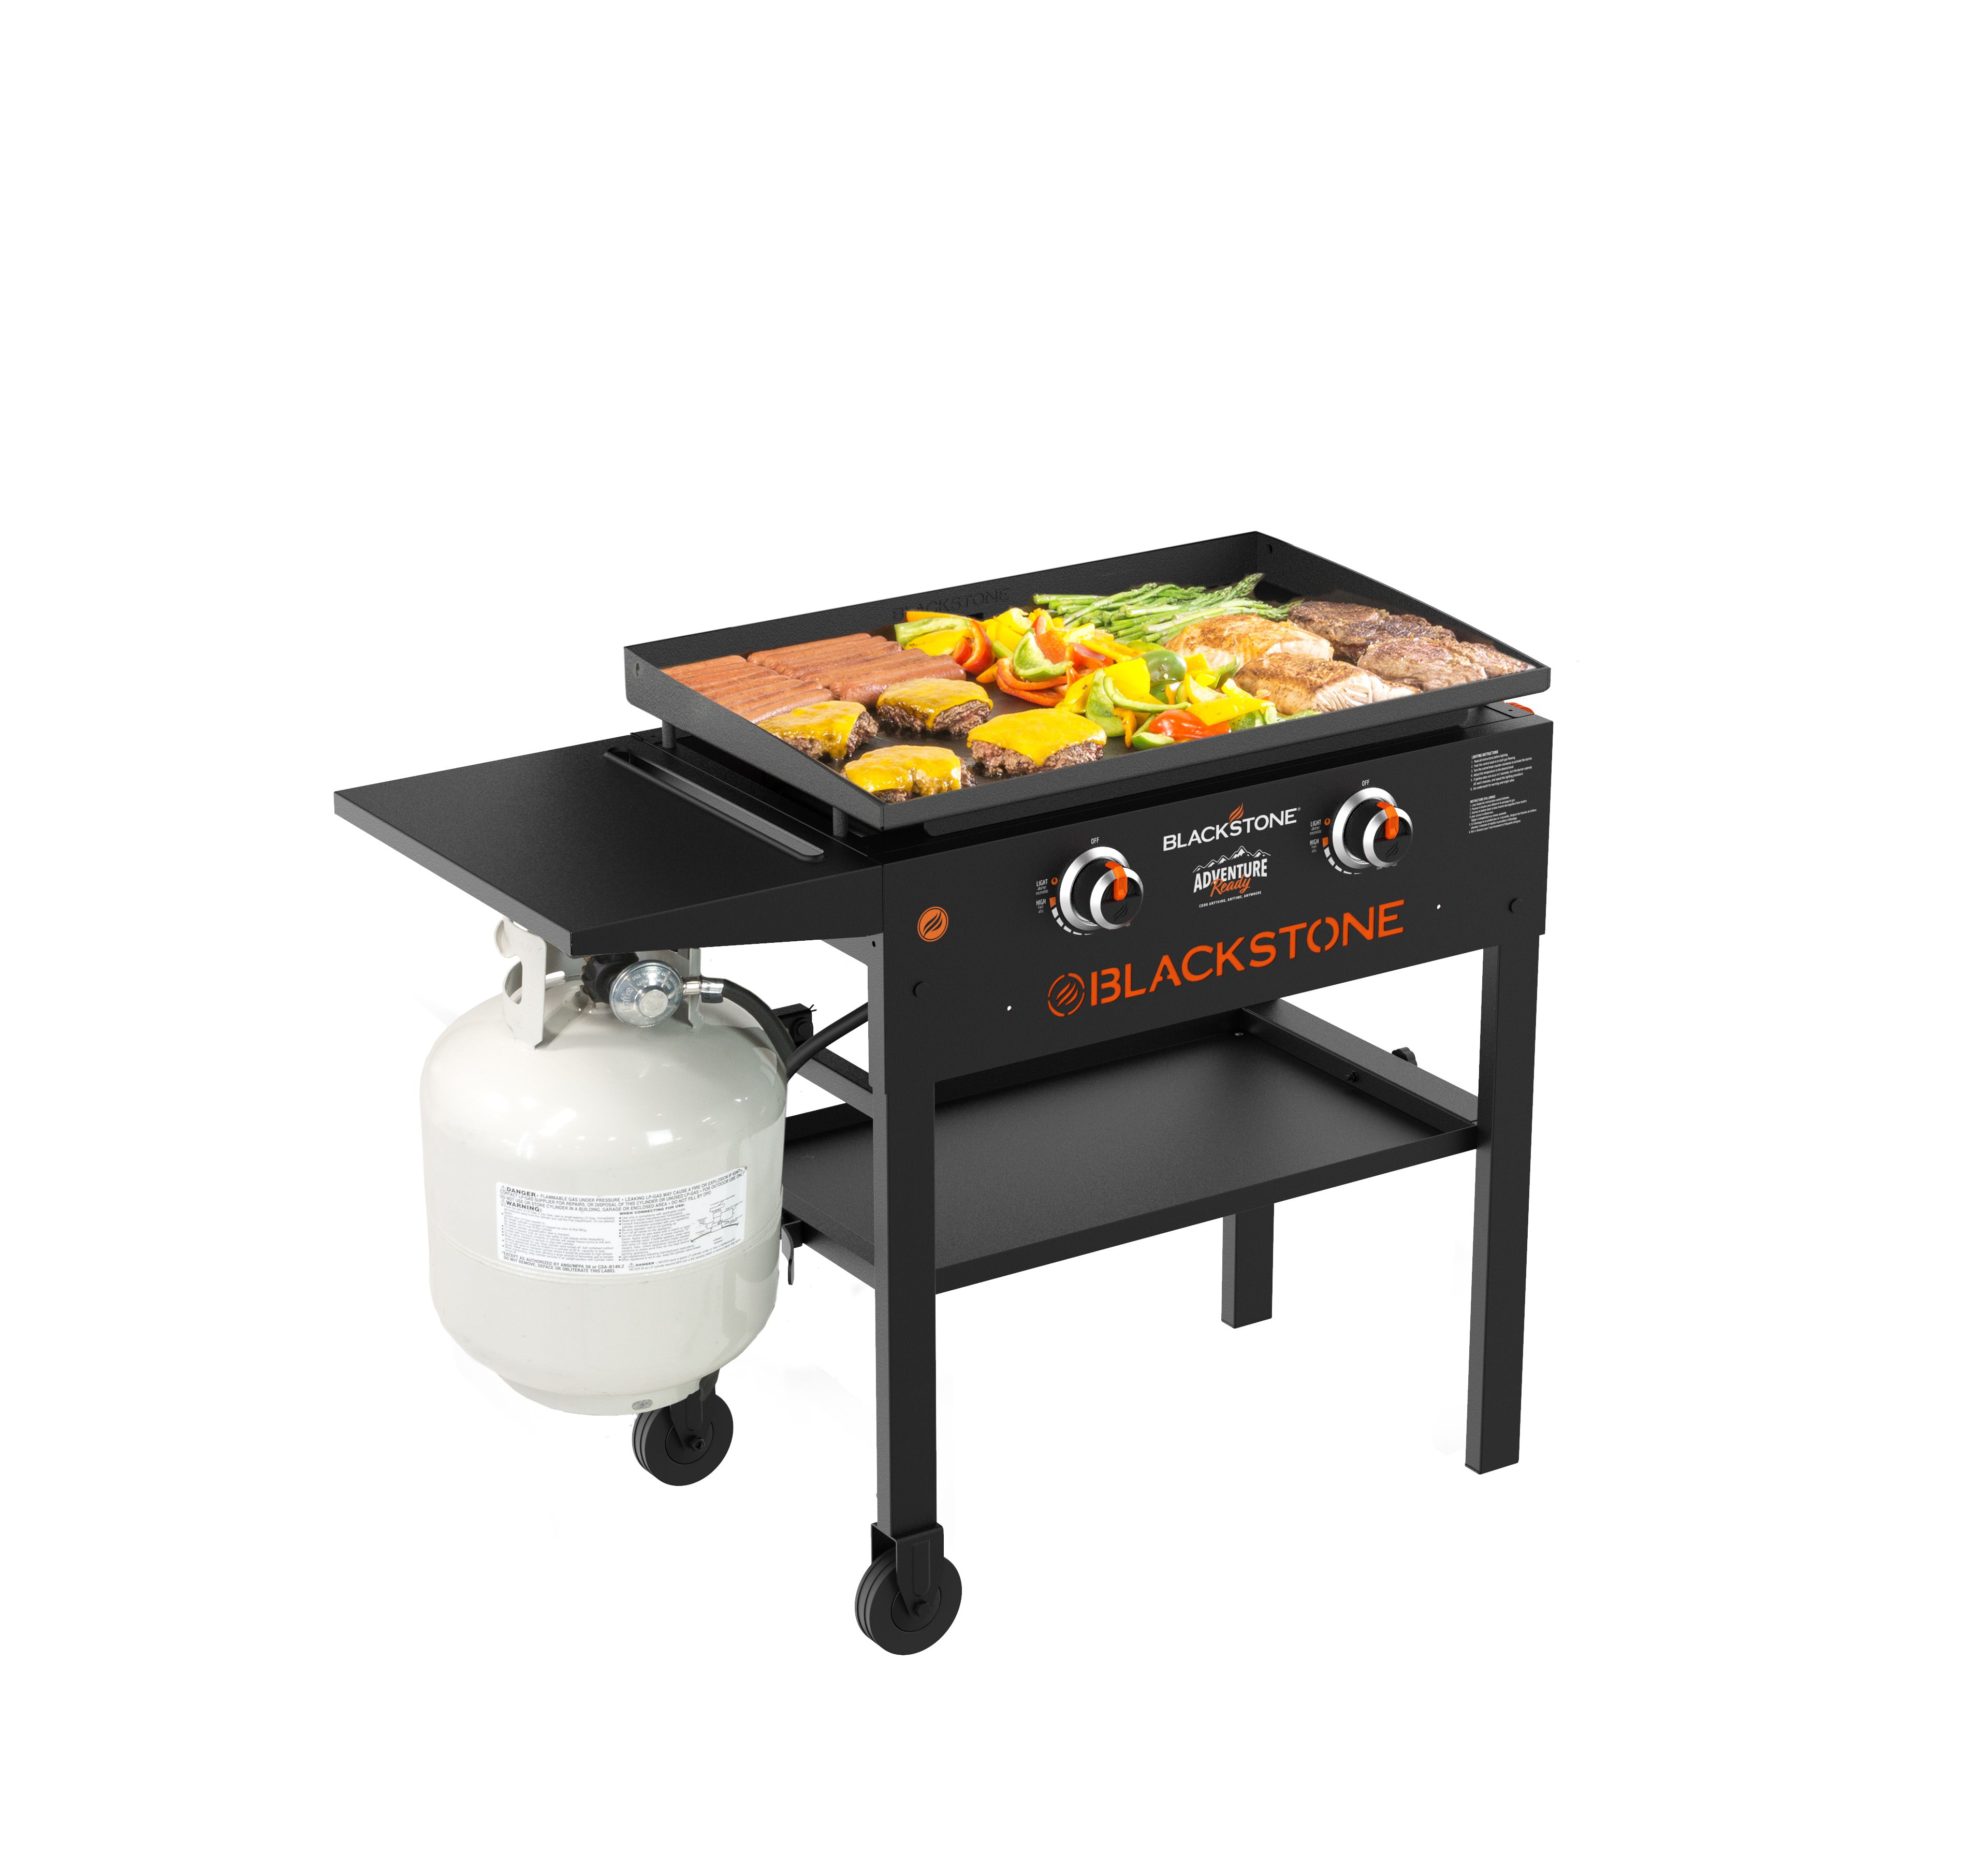 Propane Fueled Restaurant Grade Blackstone 28 inch Outdoor Flat Top Gas Grill Griddle Station Limited Edition 2-Burner Professional Quality 